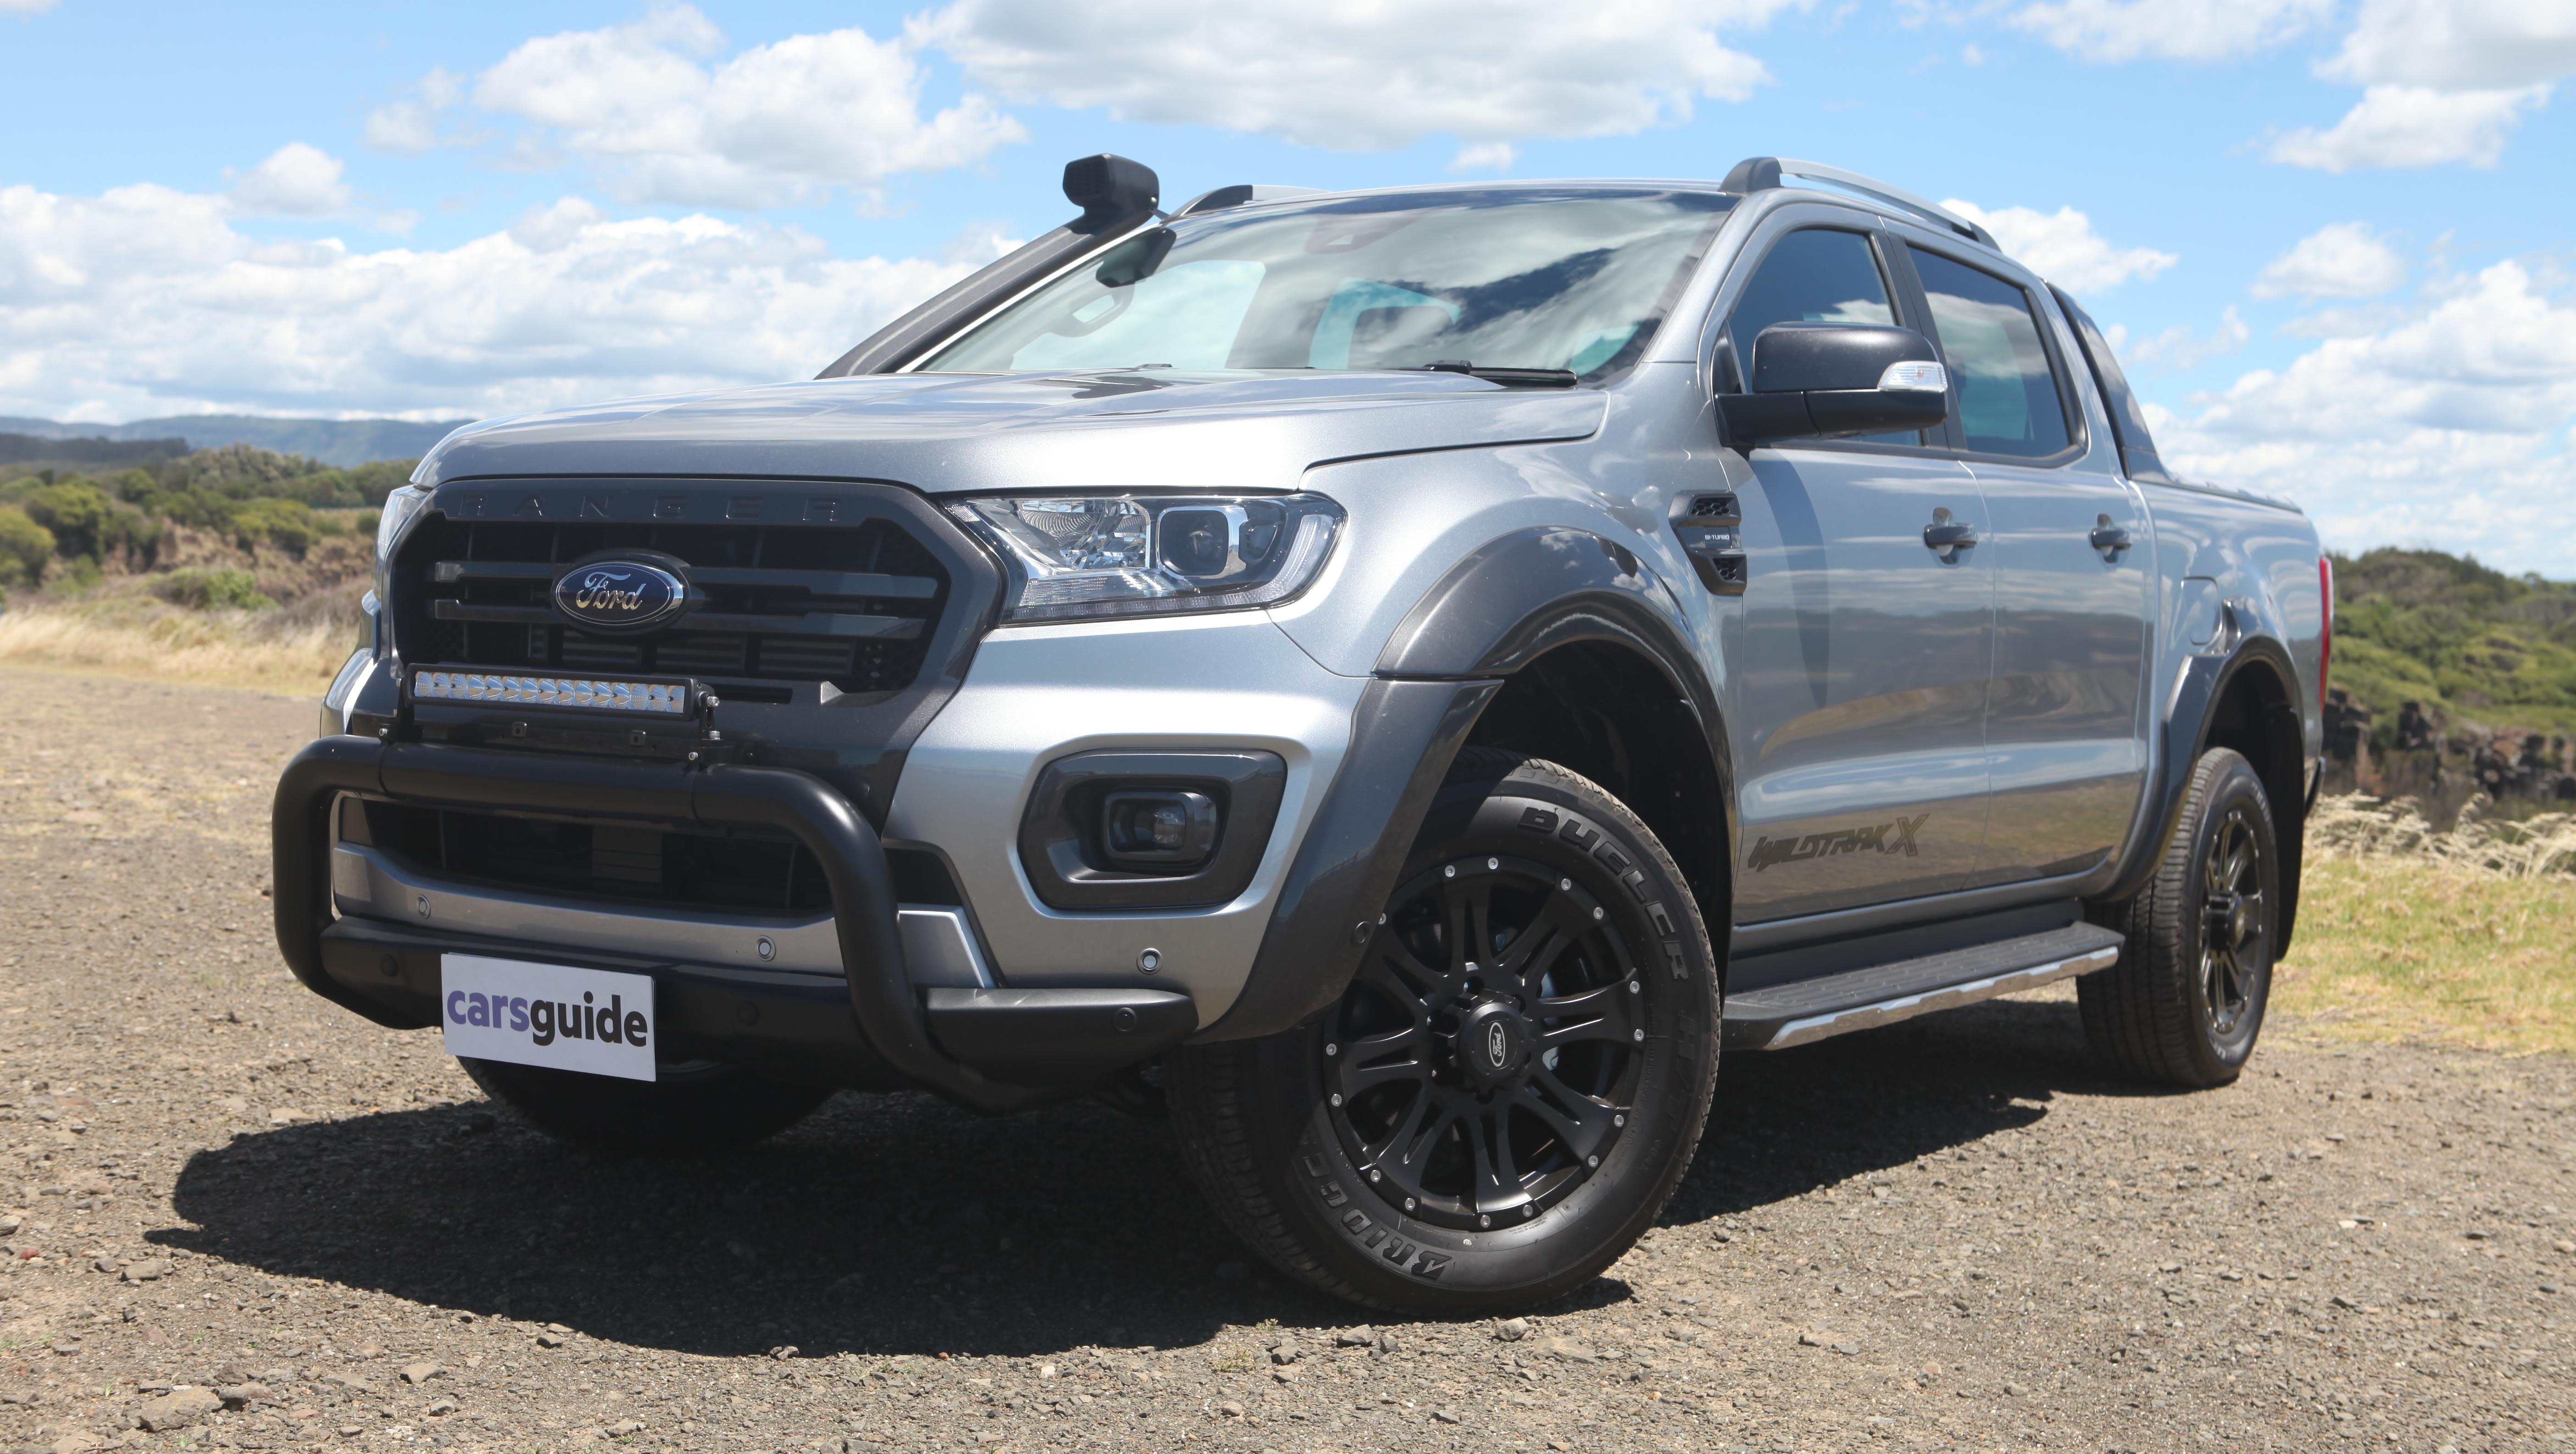 dp chip ford ranger review